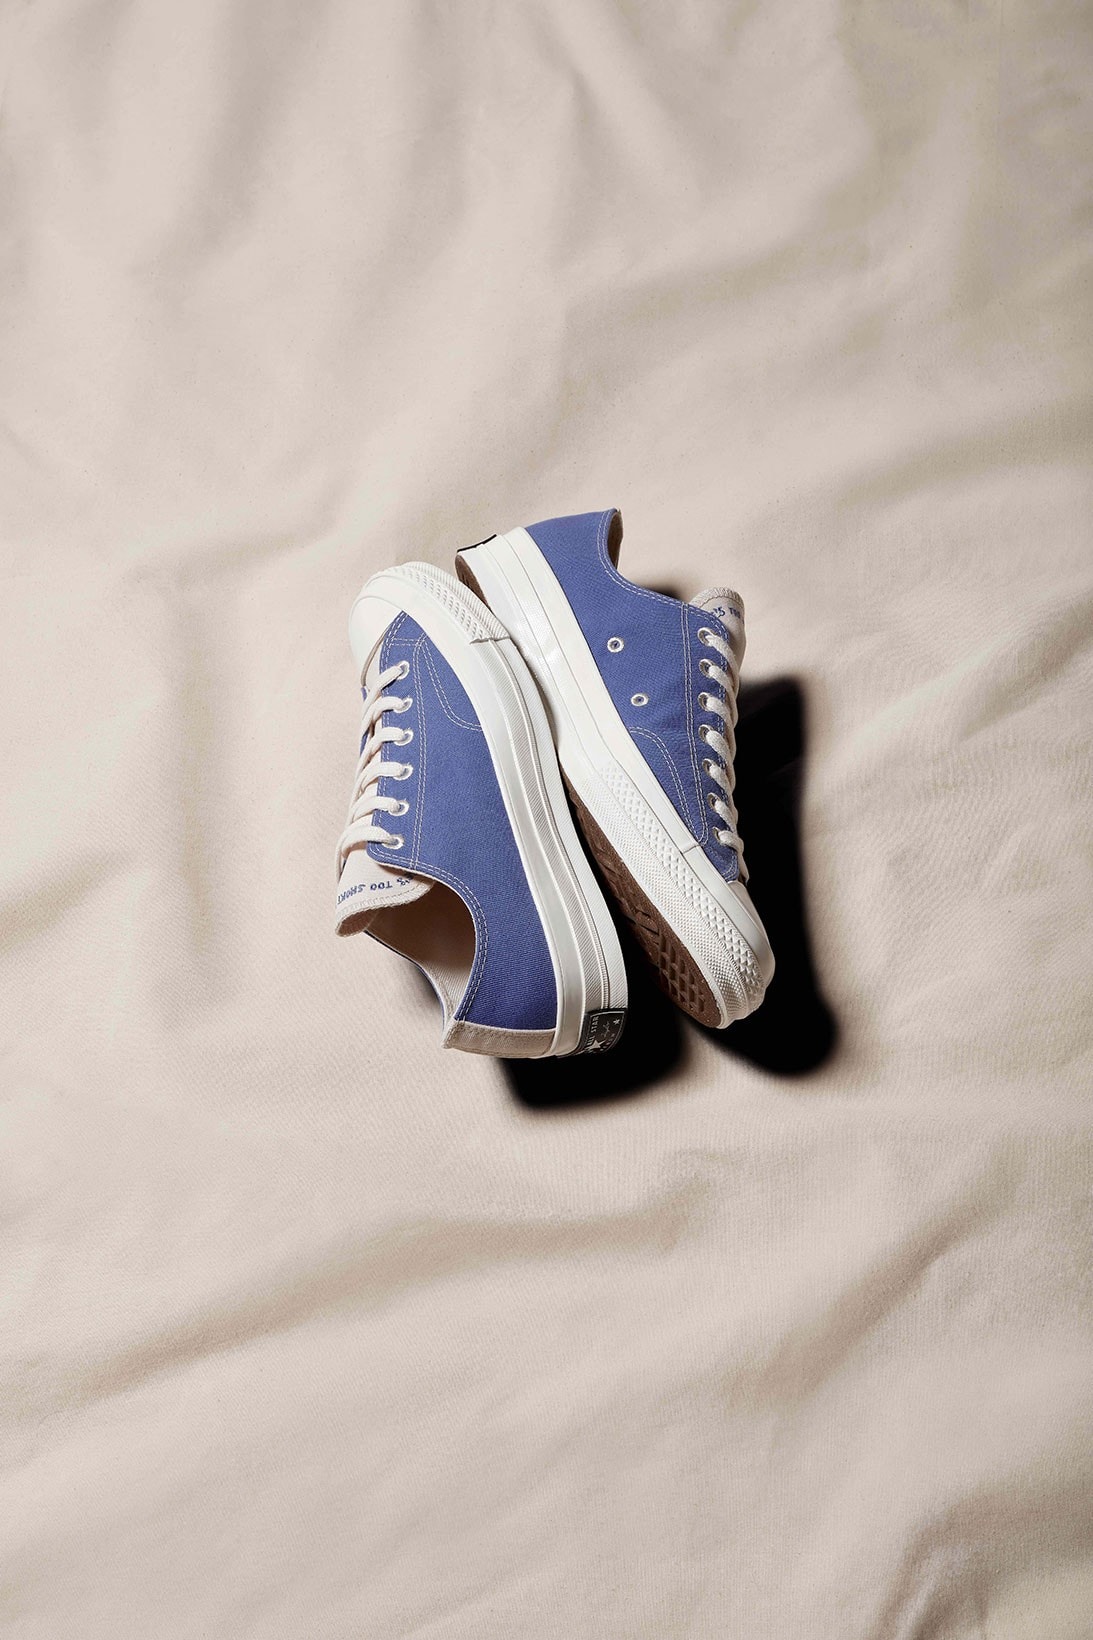 converse chuck Taylor all star made from sustainability plastic